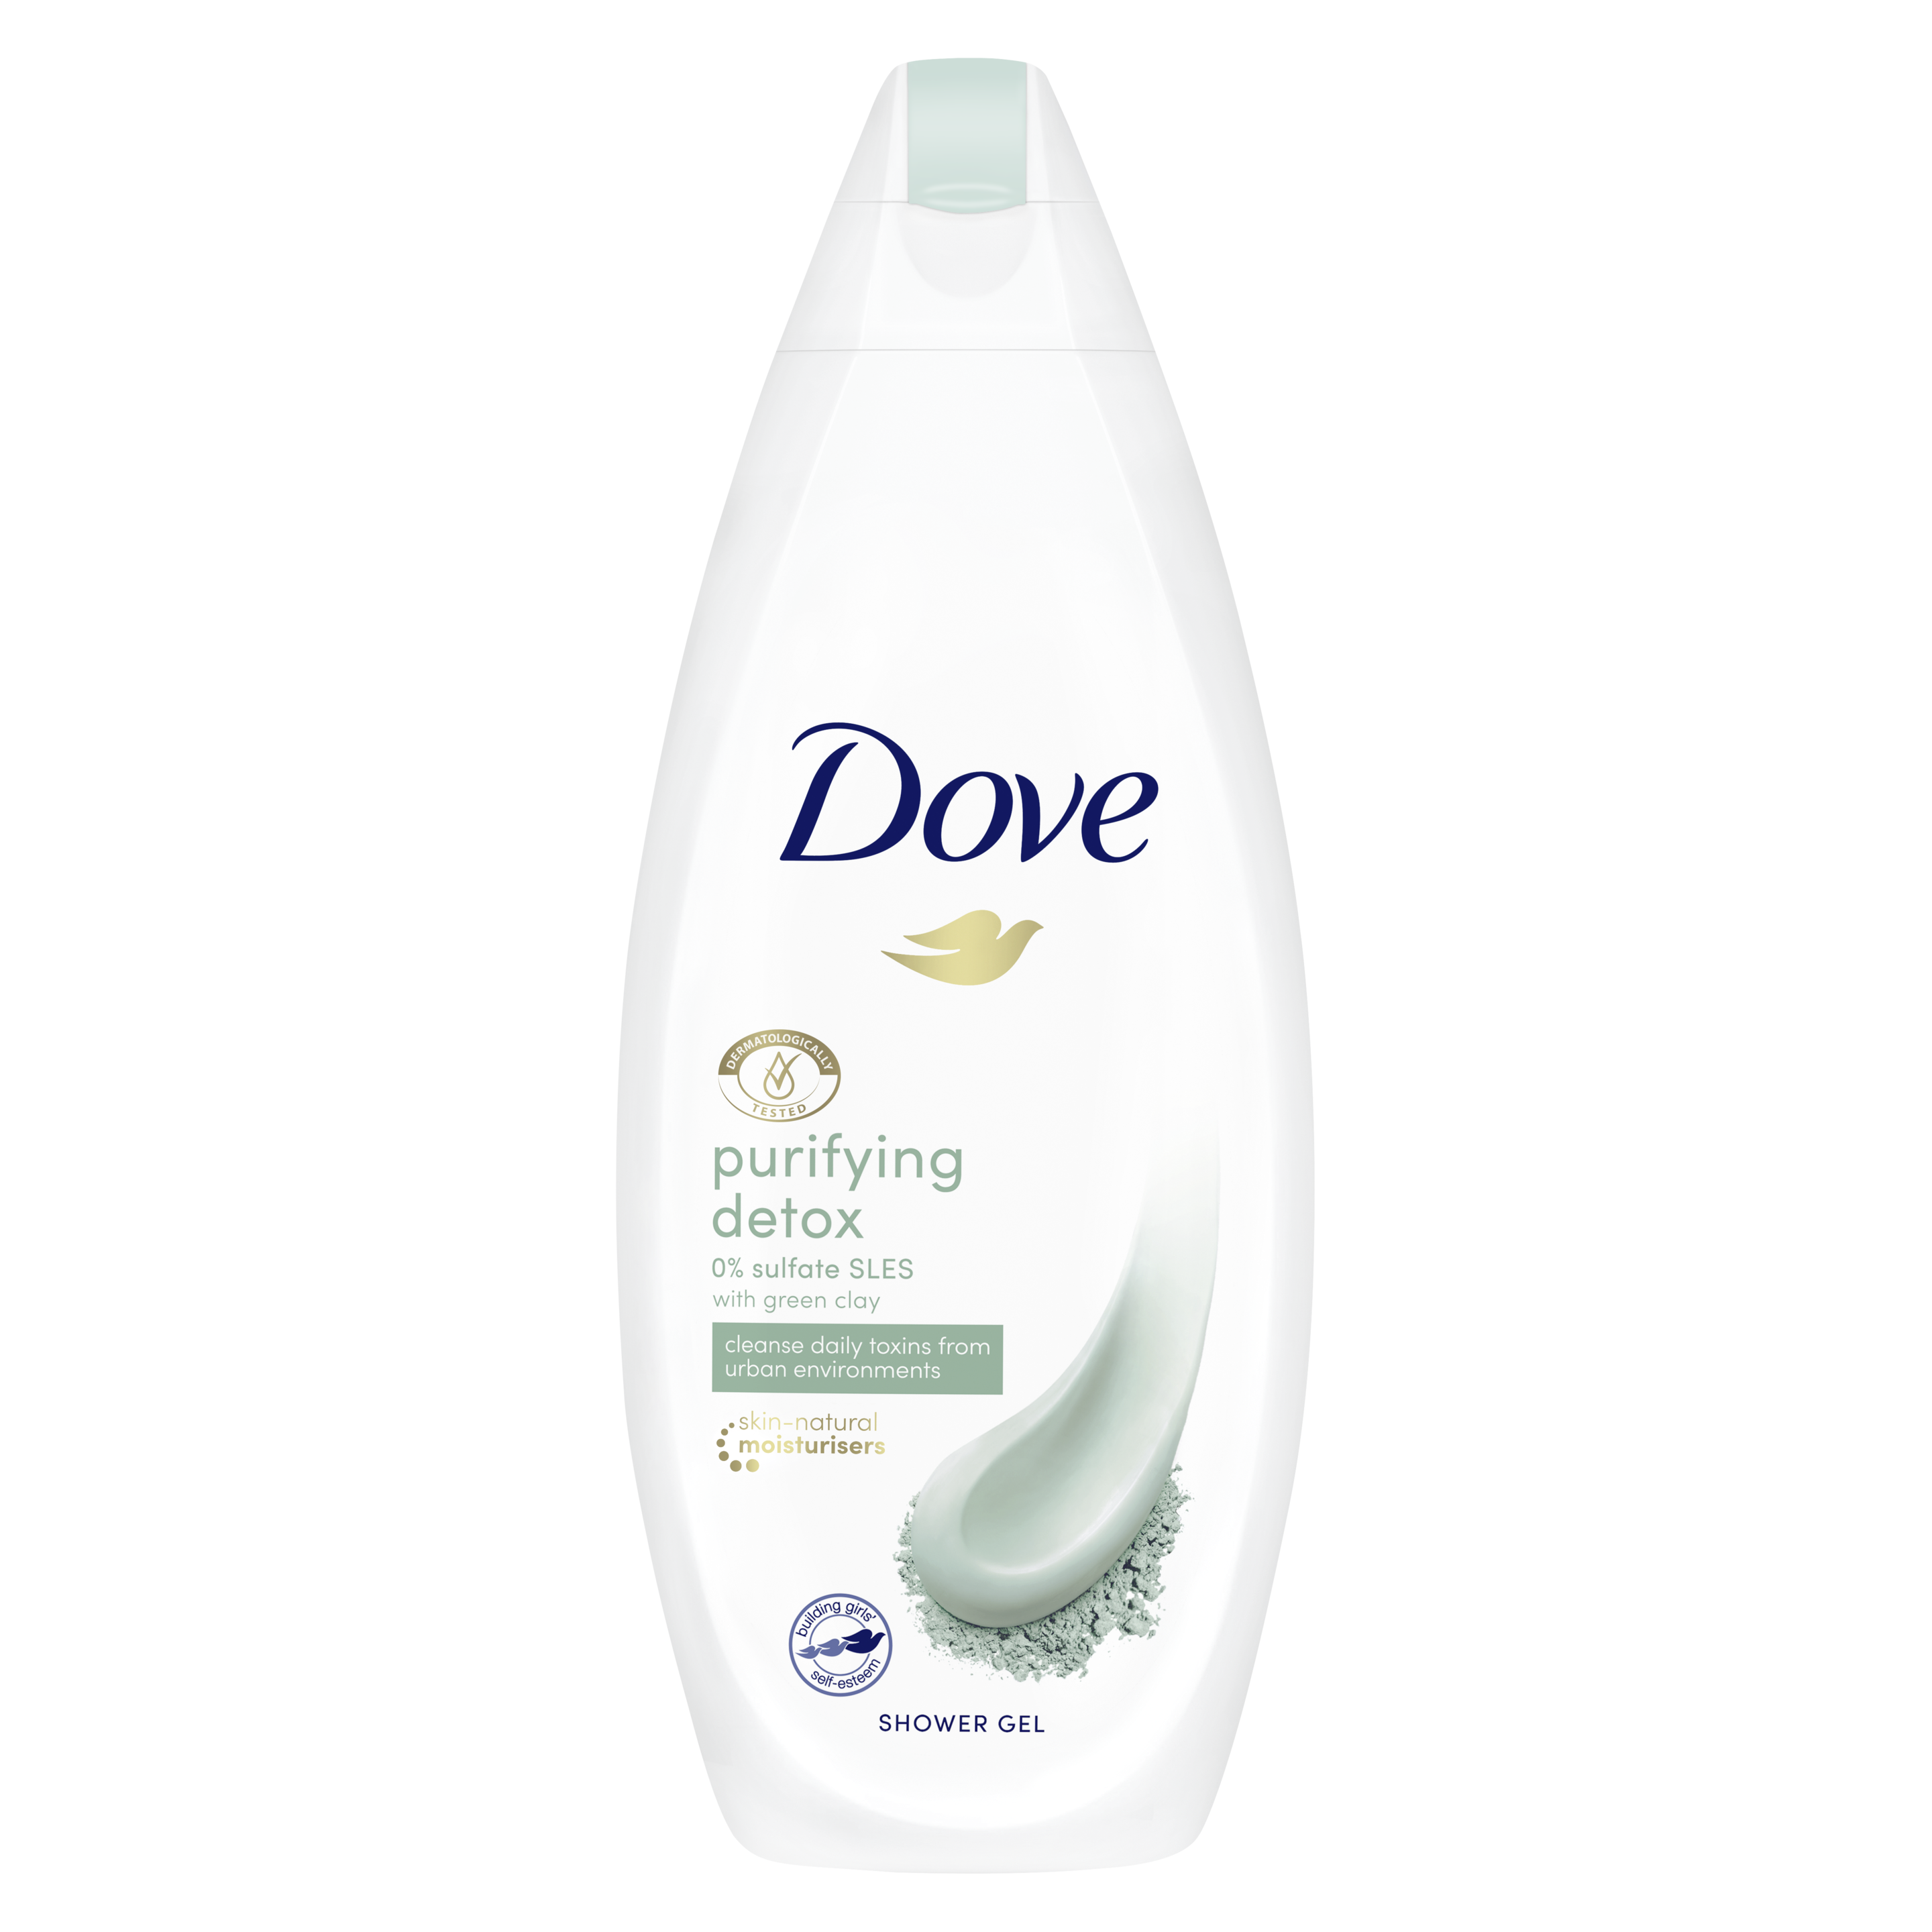 Dove Purifying Detox with Green Clay Shower Gel 250ml